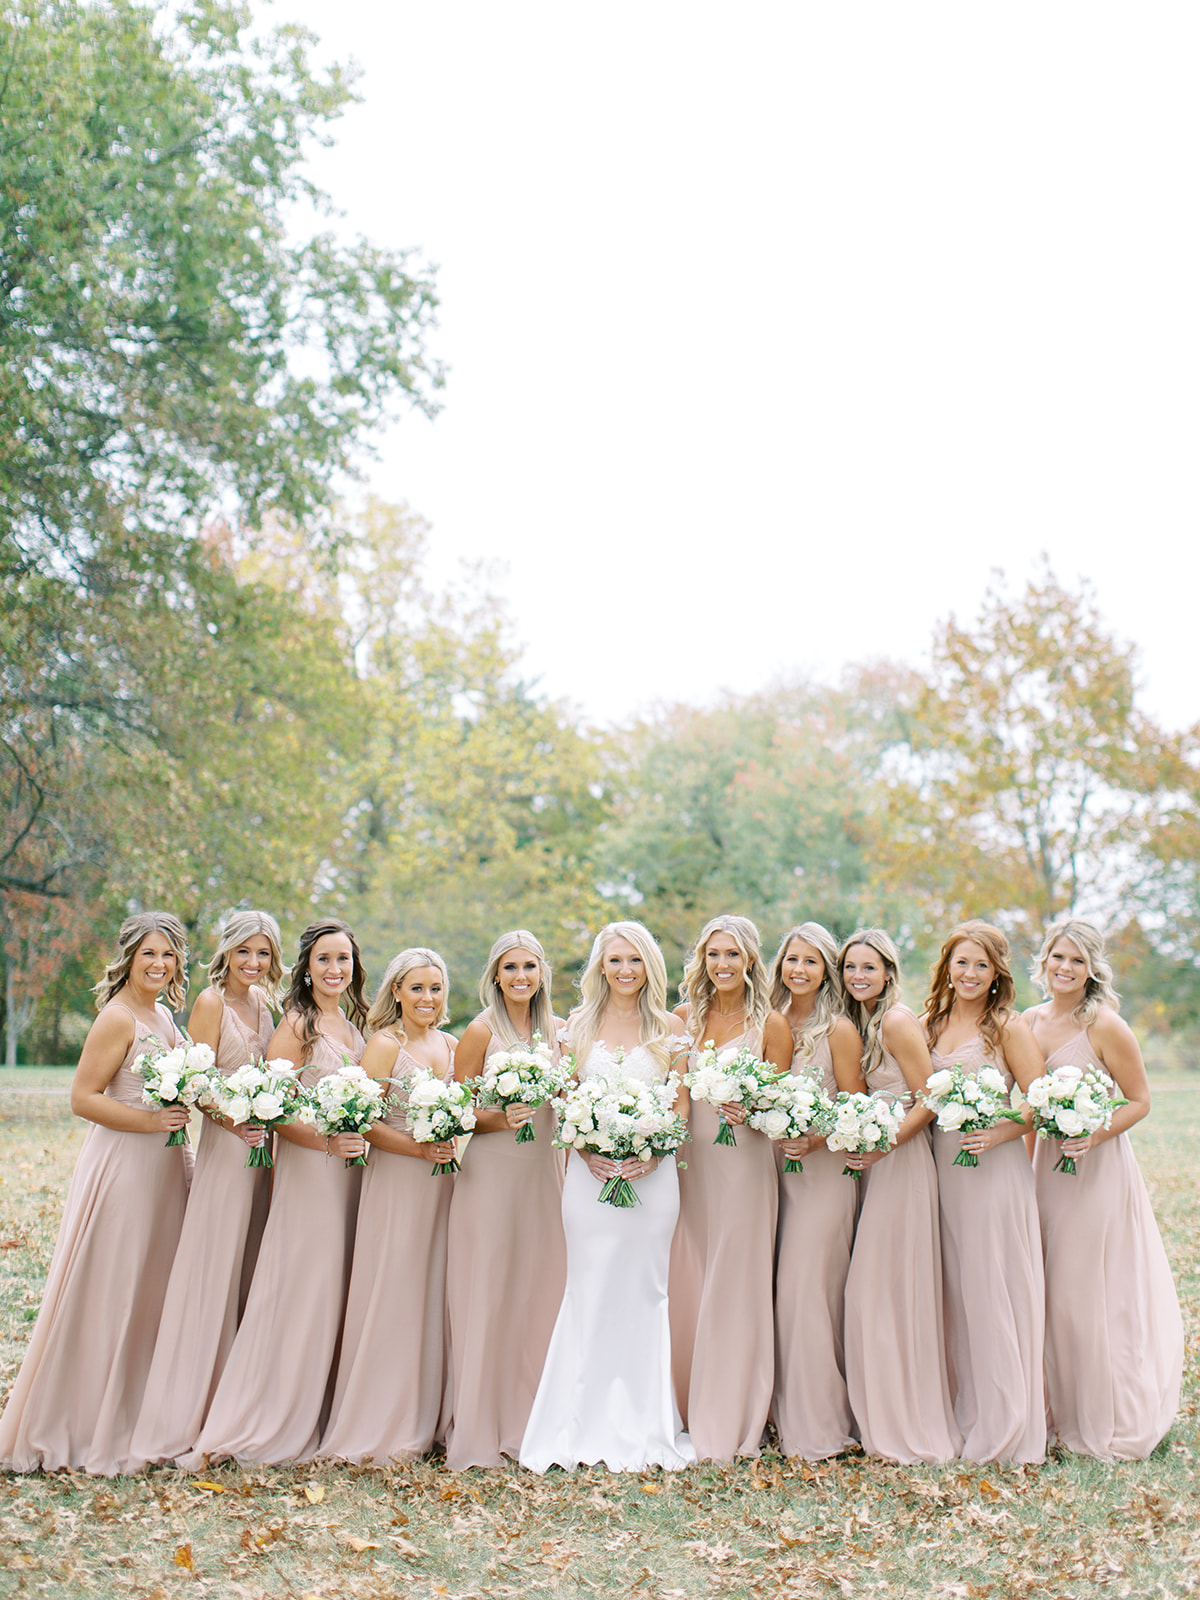 Bride standing with bridesmaids holding bouquets